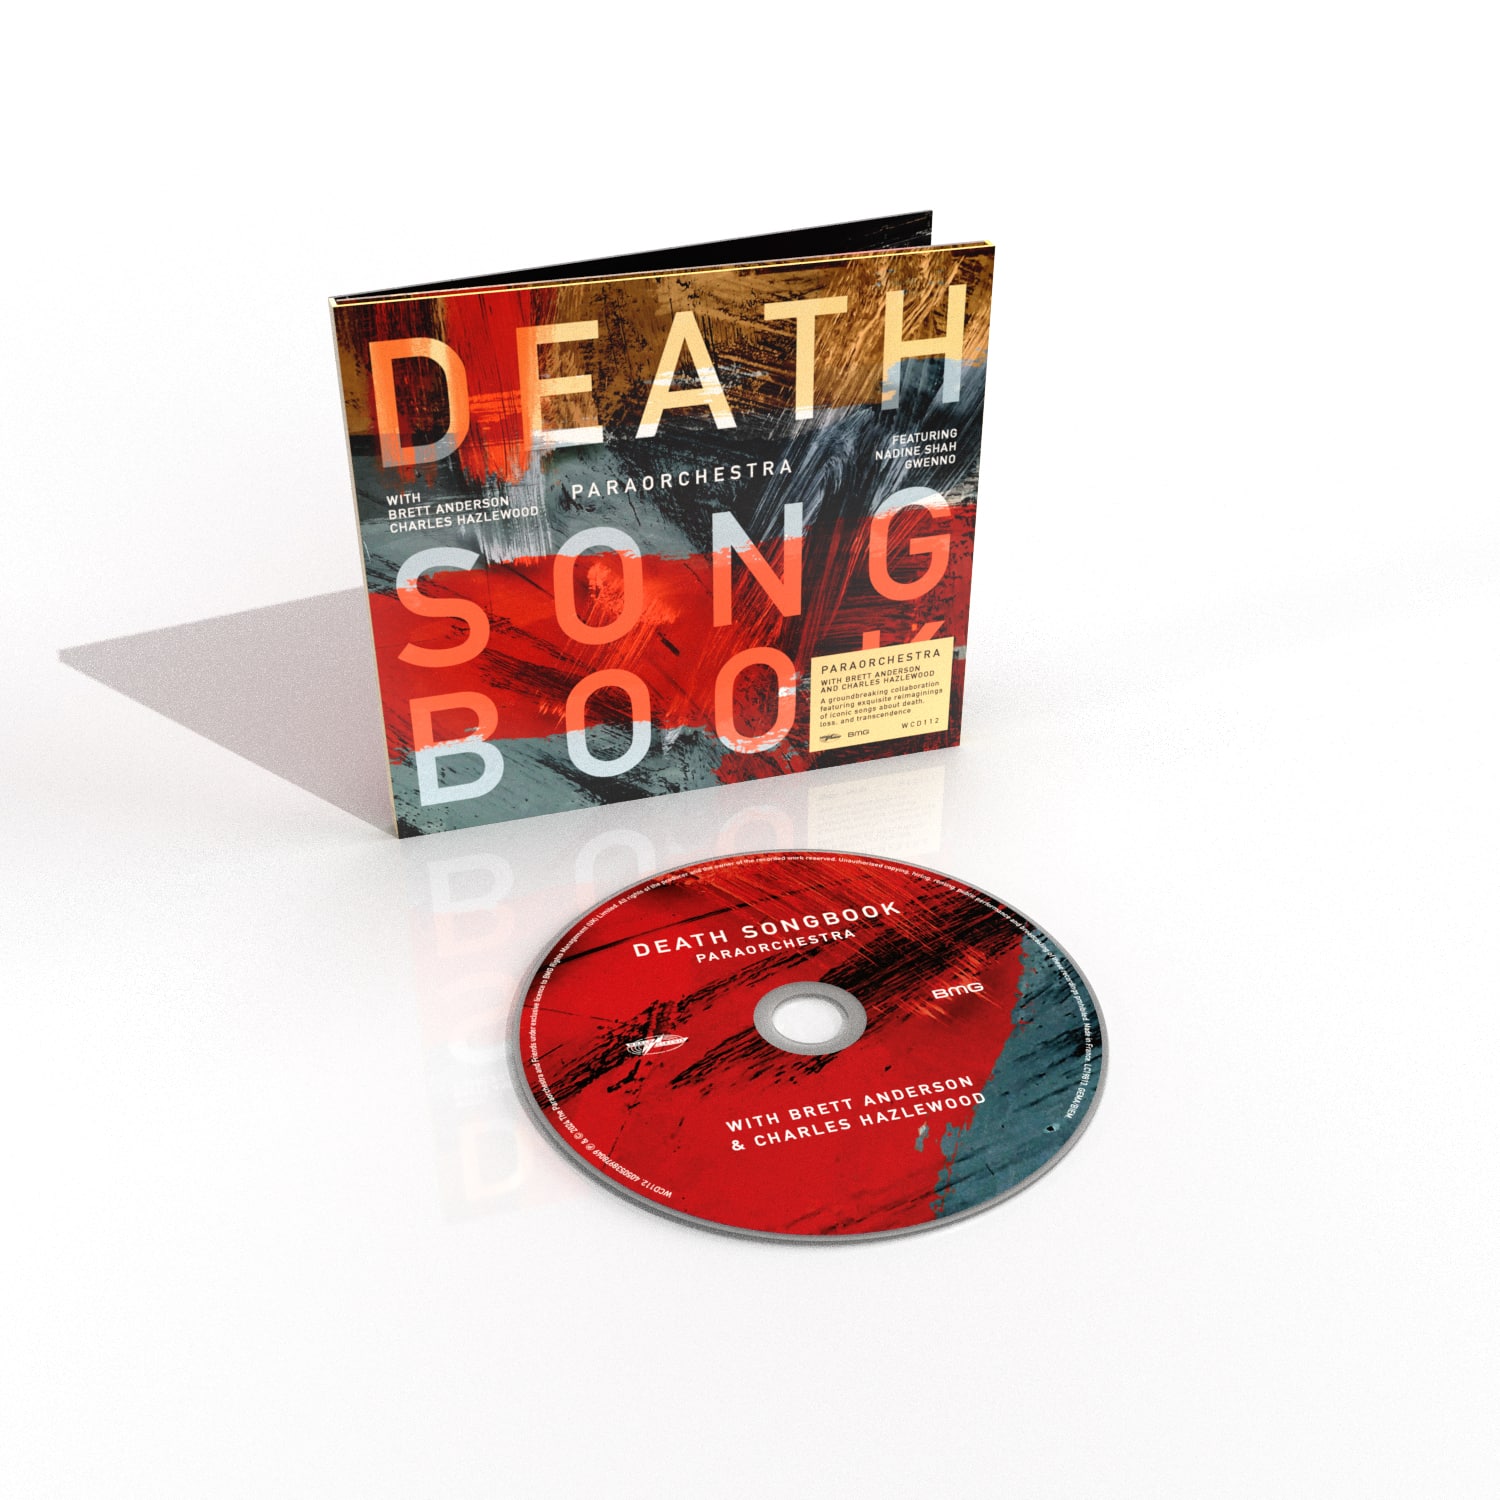 Paraorchestra_DeathSongBook_1CD_4050538978049_EXPLODED.jpg